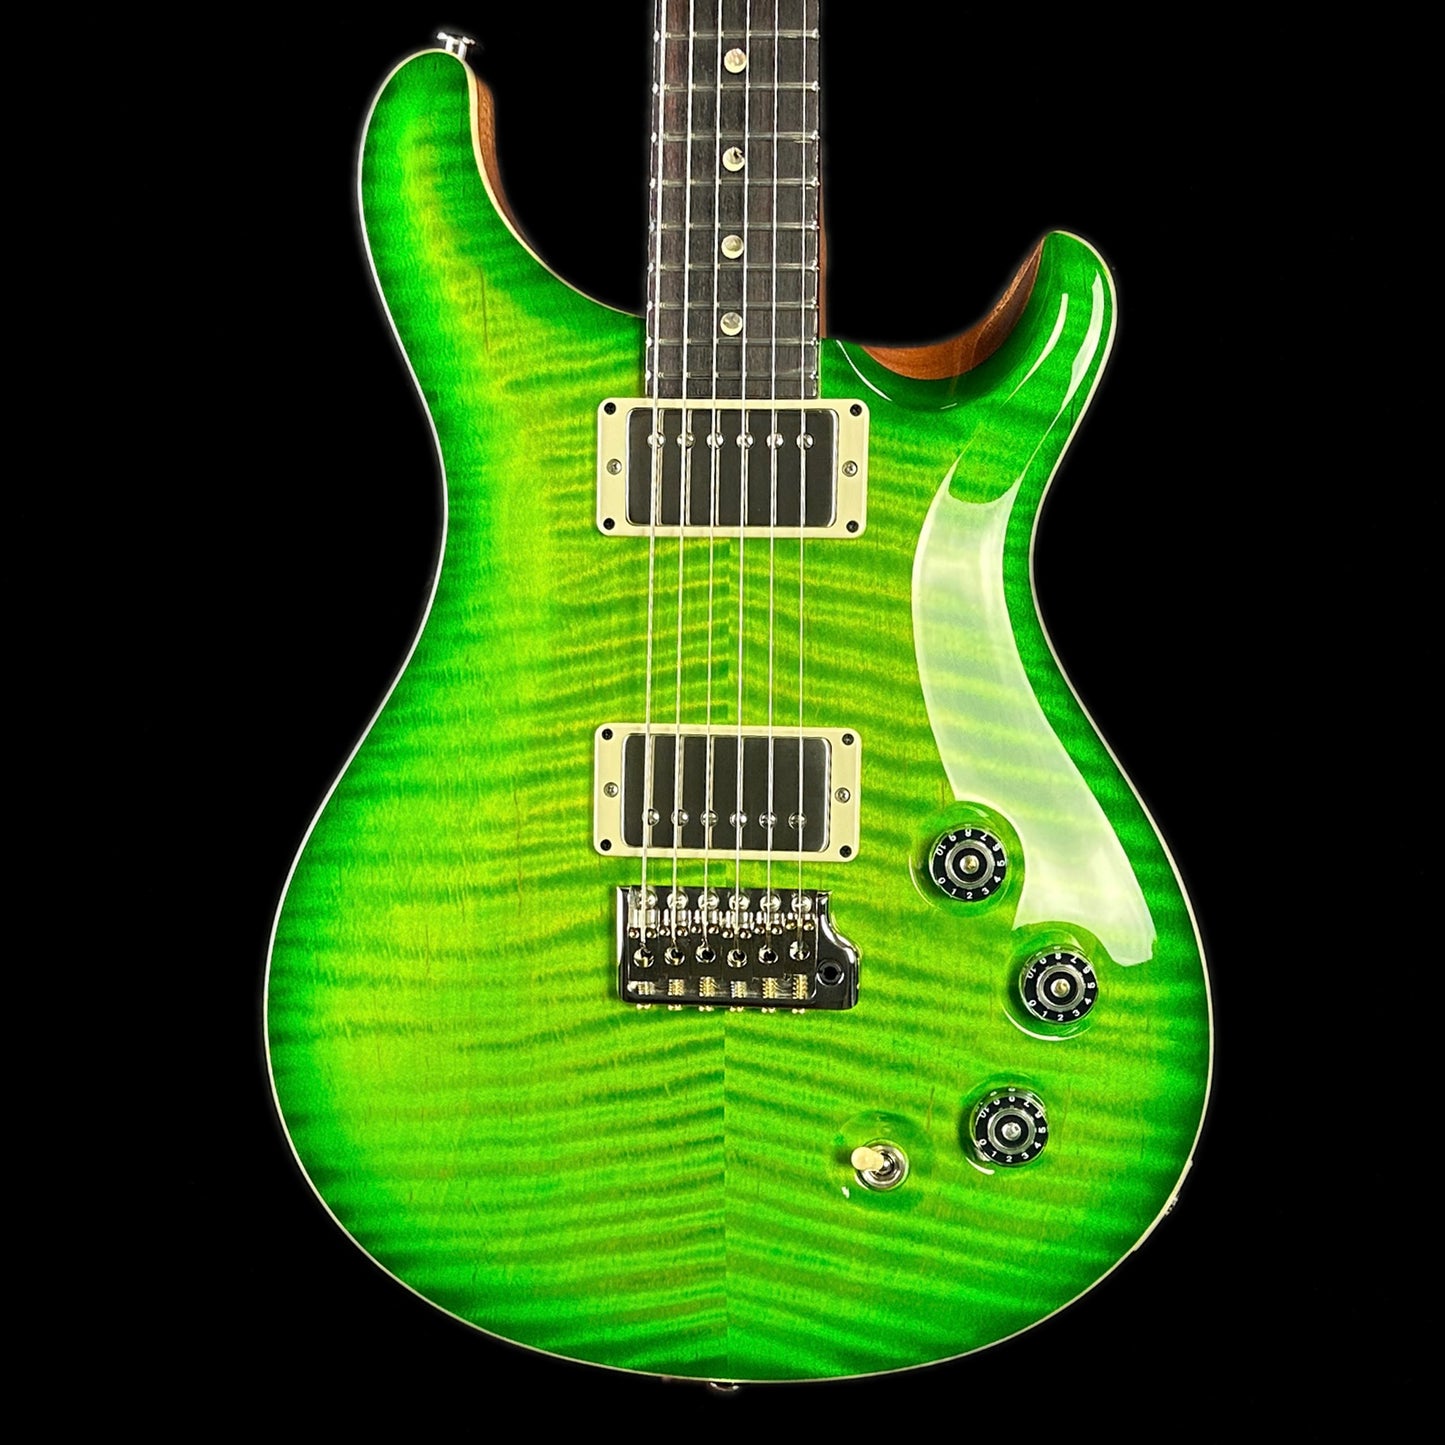 Front of body of PRS Paul Reed Smith DGT David Grissom Trem Eriza Verde Moons.